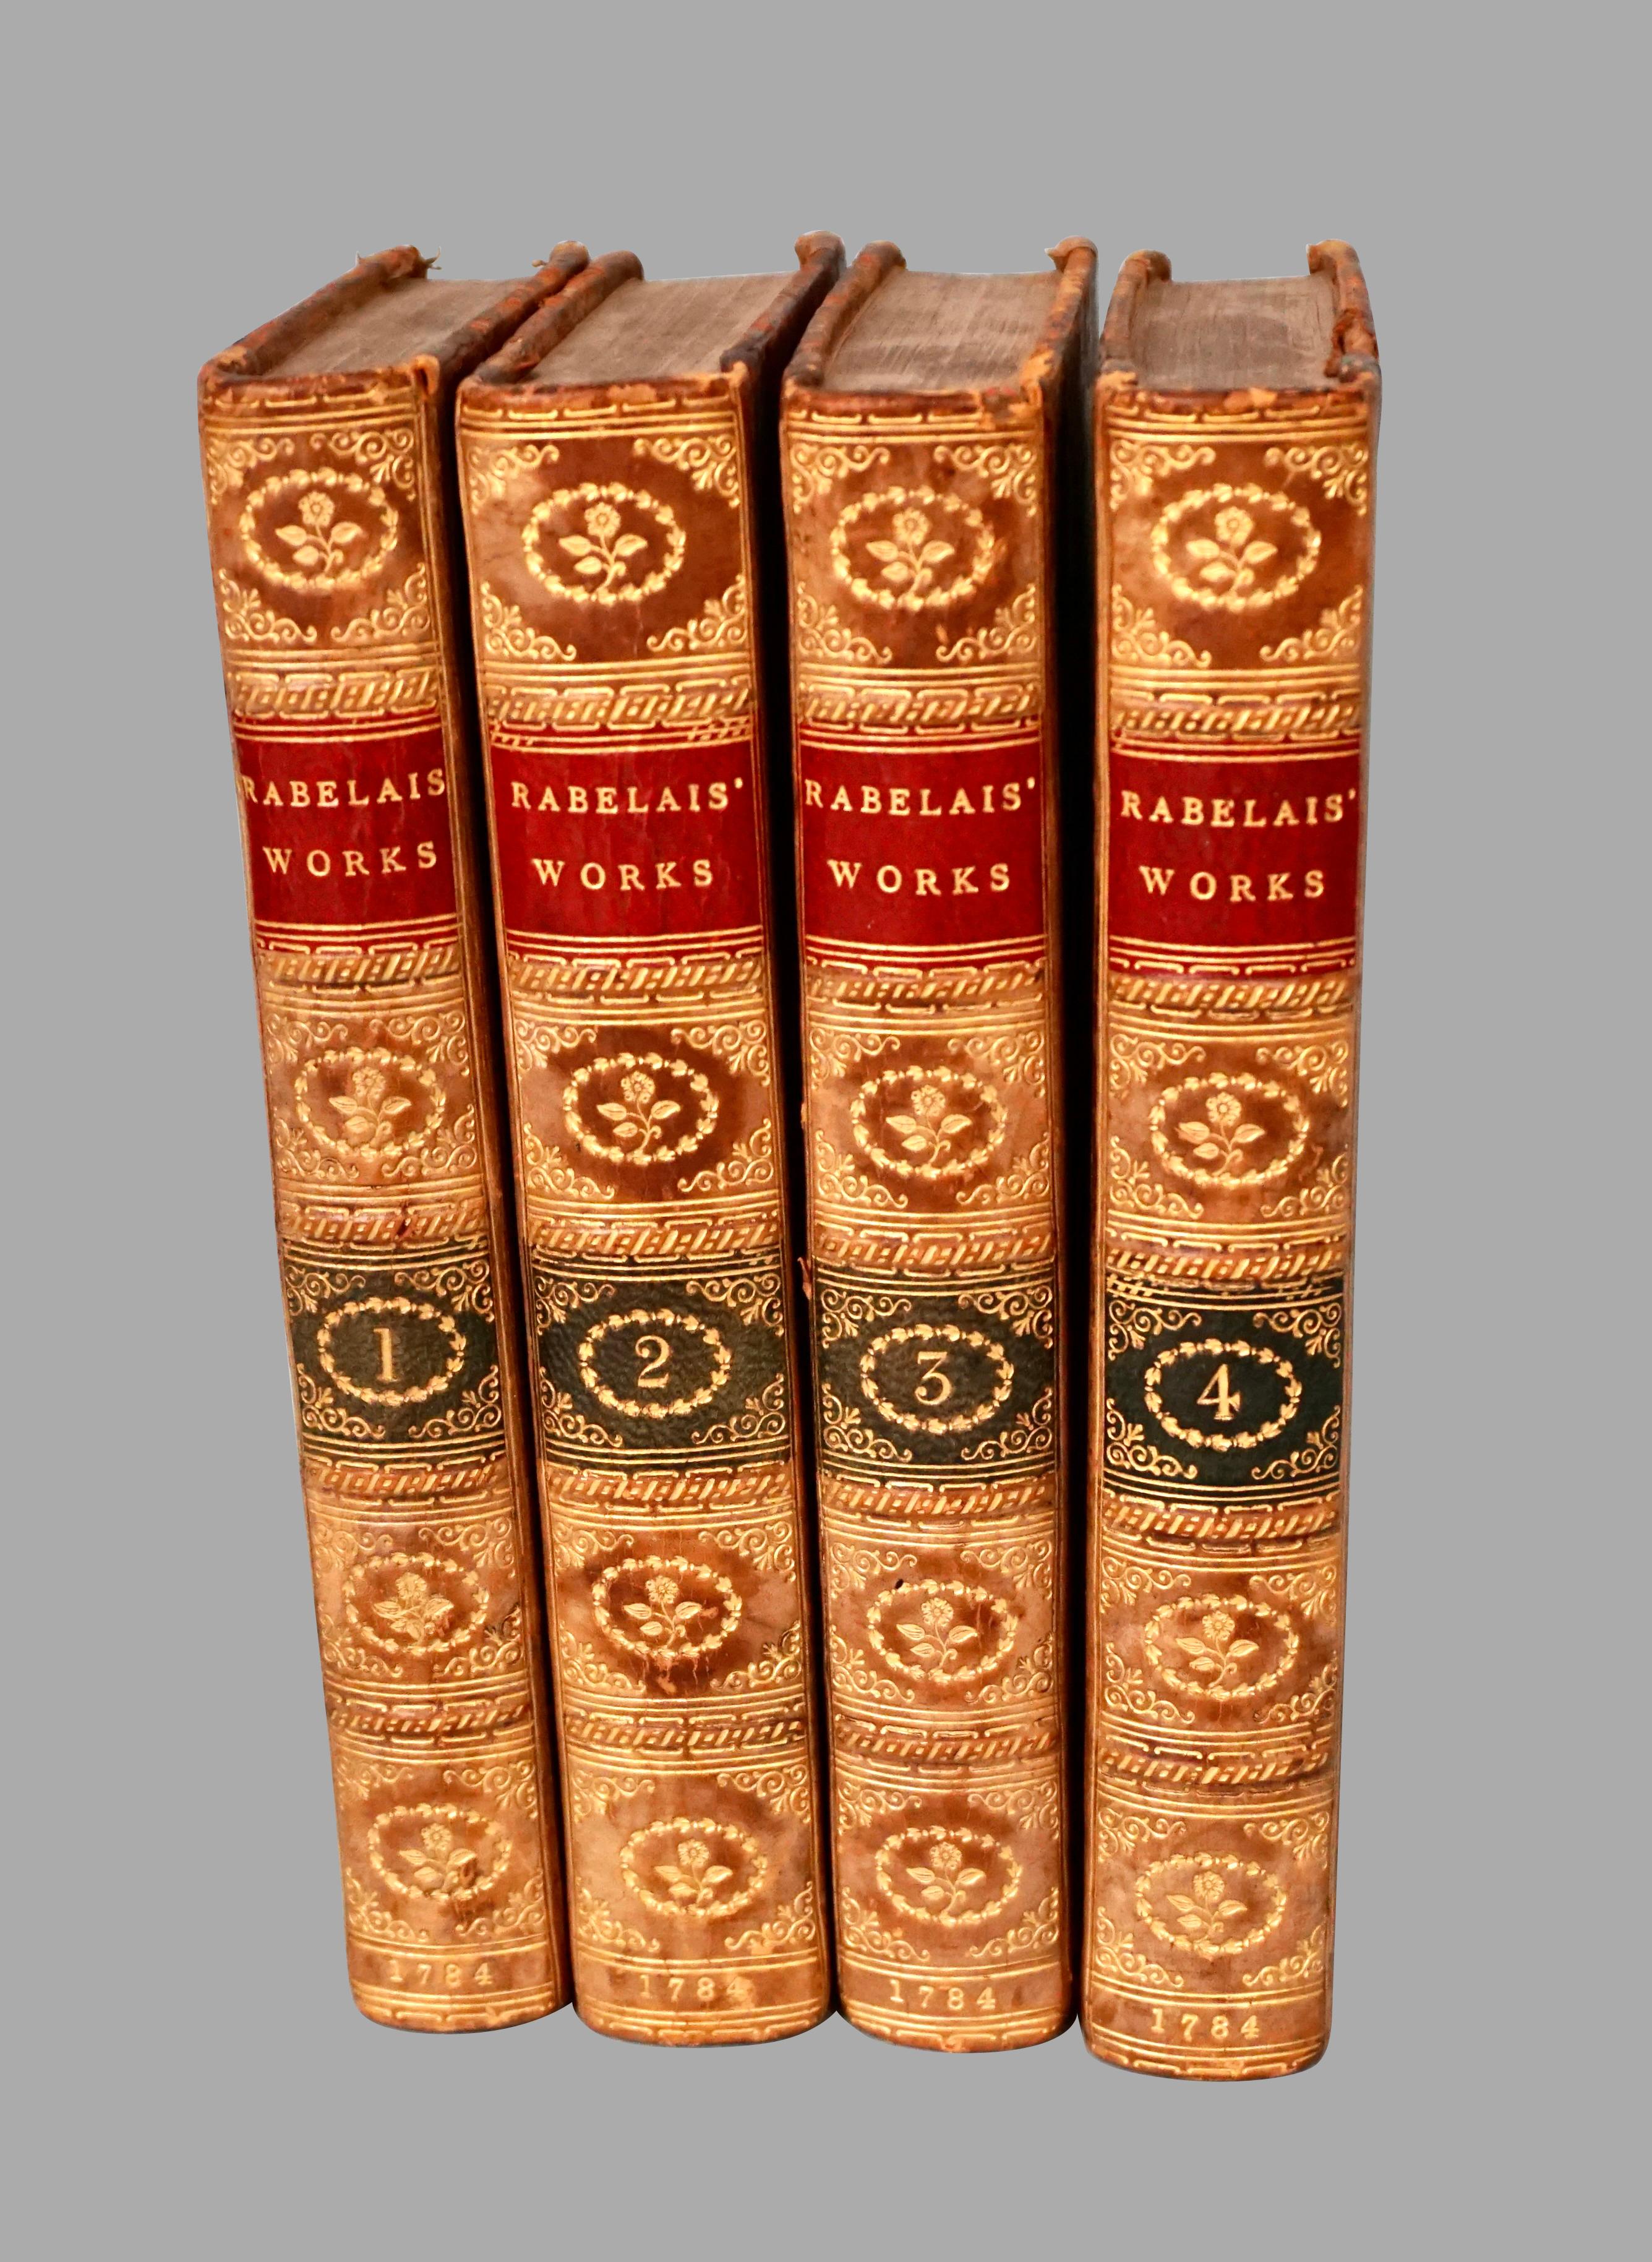 The works of Francis Rabelais, translated from the French in 4 full original calf bindings with gilt tooled spines published in London by T. Evans in the Strand in 1784. Rabelais was a famous French Renaissance writer, physician, humanist, monk and